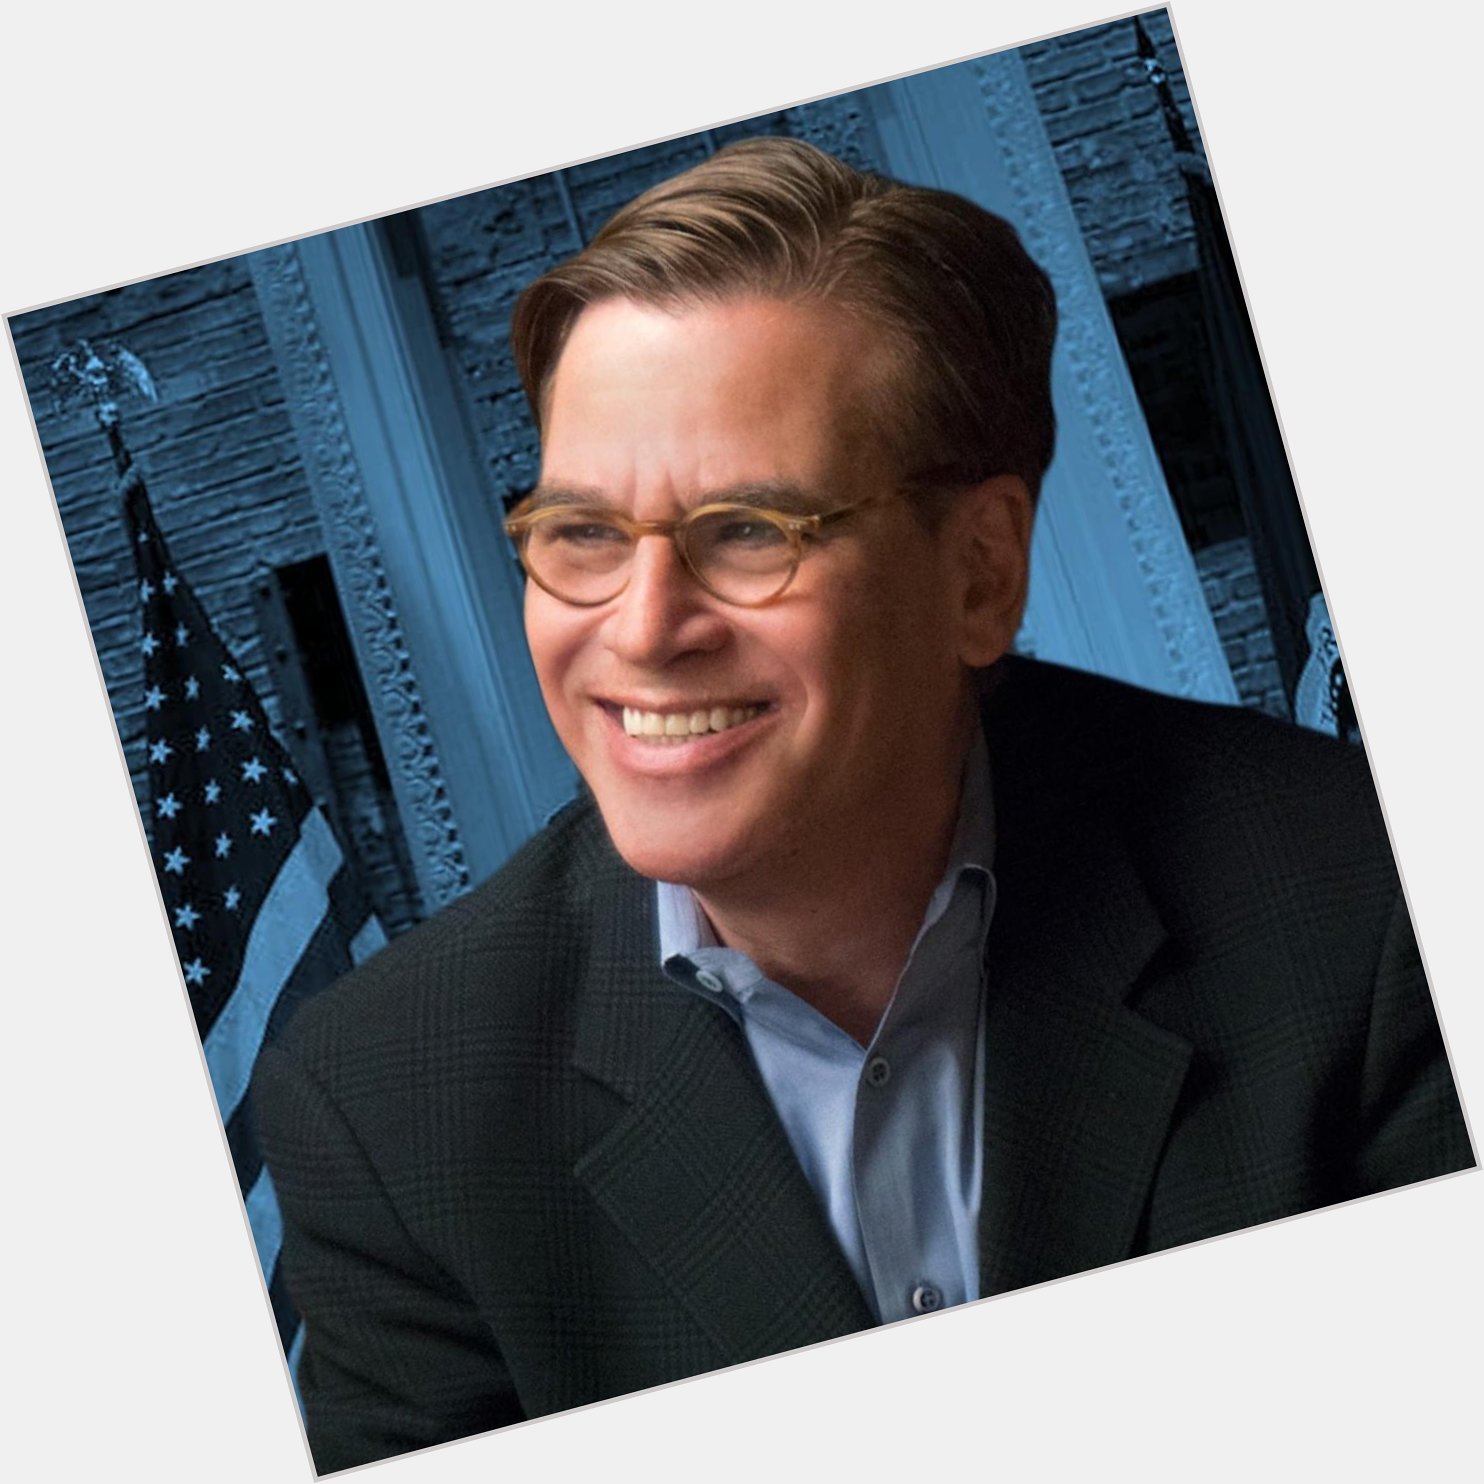 HAPPY BIRTHDAY AARON SORKIN !!
Thank you for the hundreds of hours of enjoying your brilliant work ! 